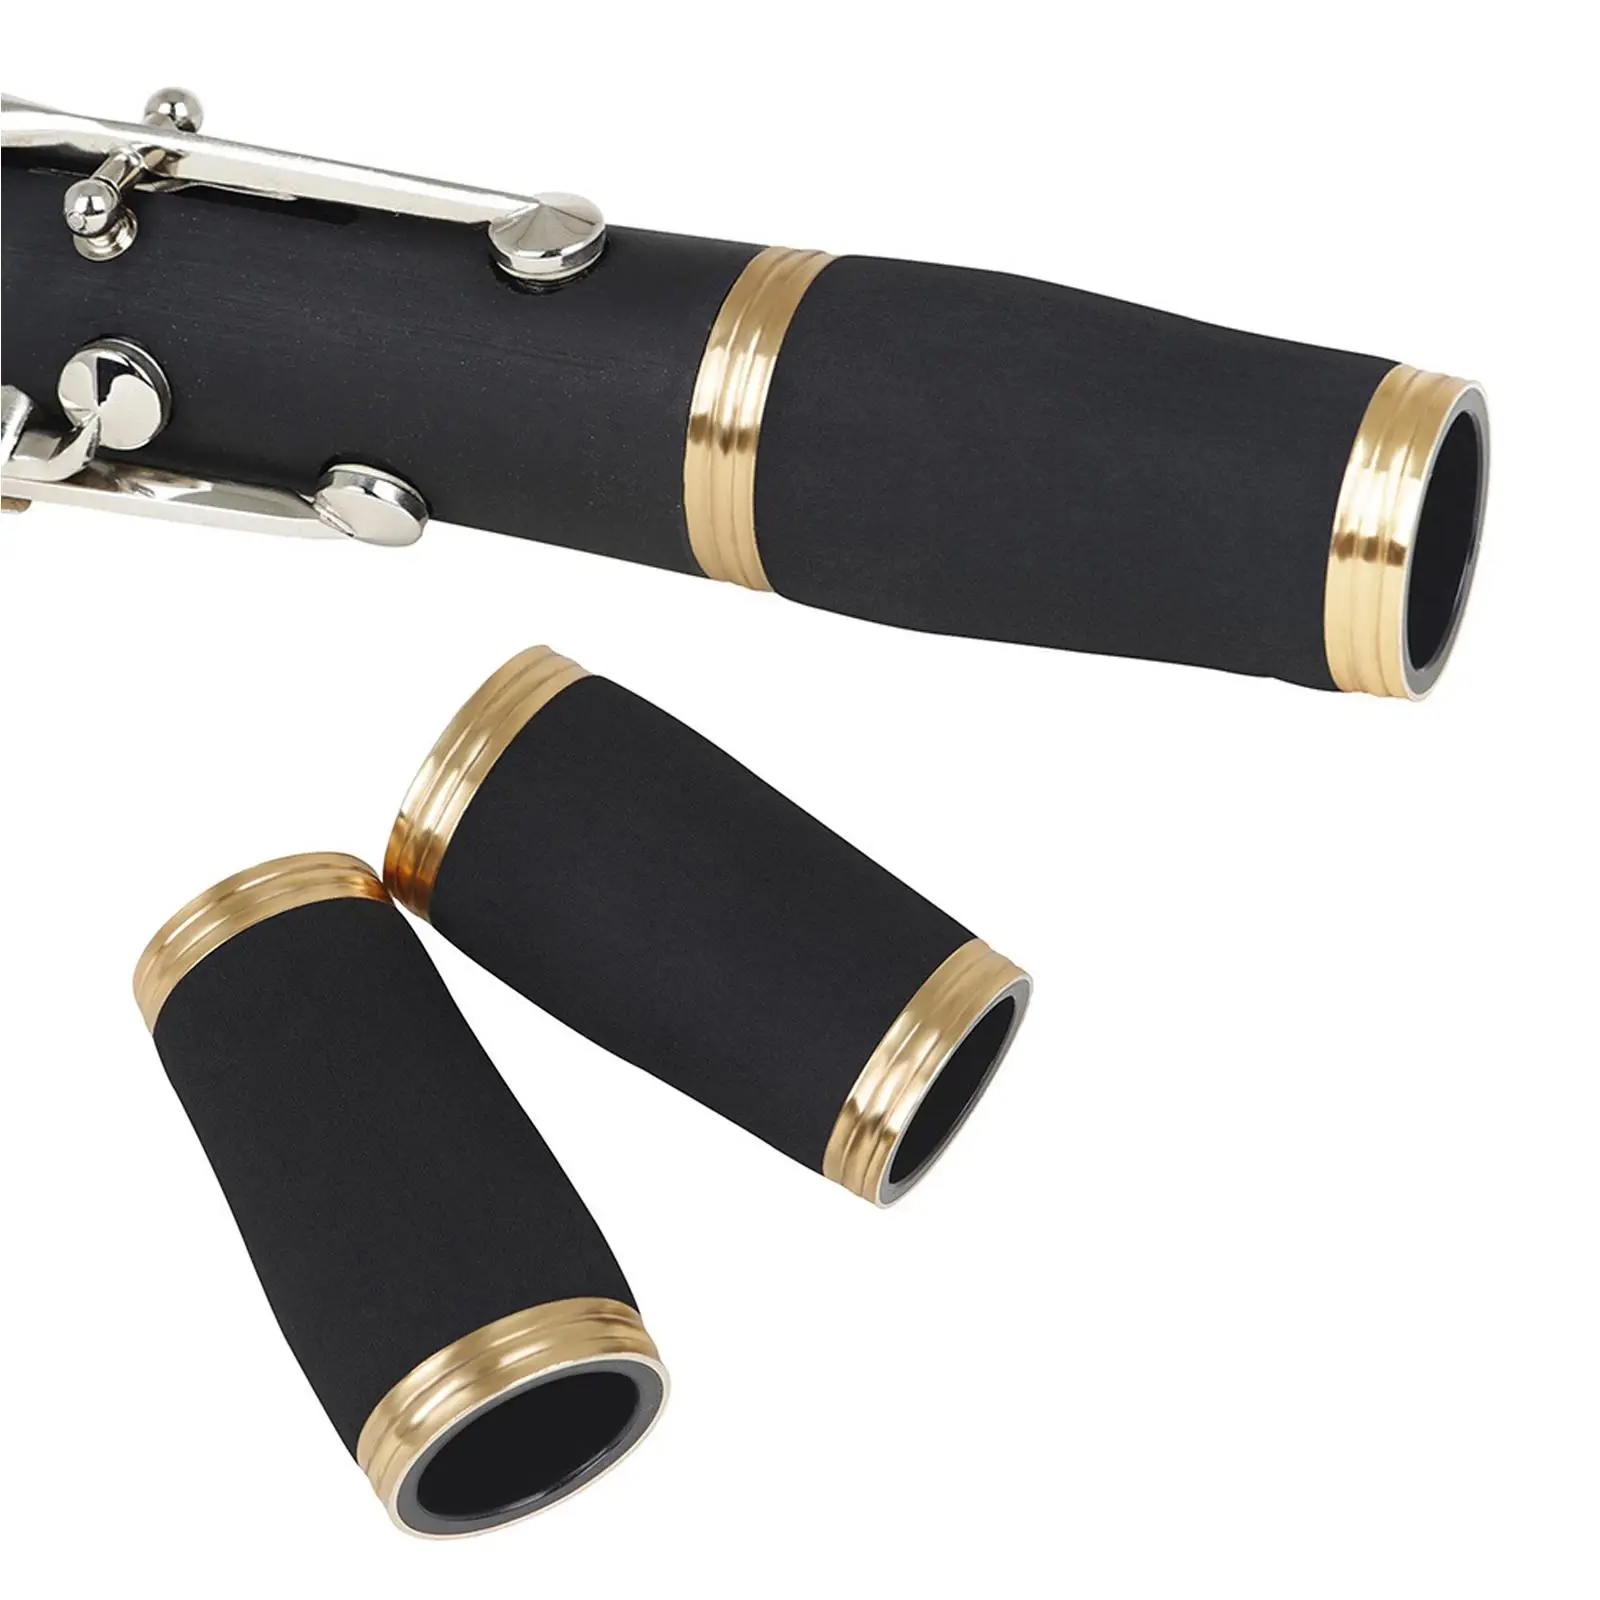 Clarinet Tube, Black Clarinet Barrel Replacement Tuning Tube, for Clarinet Accessory